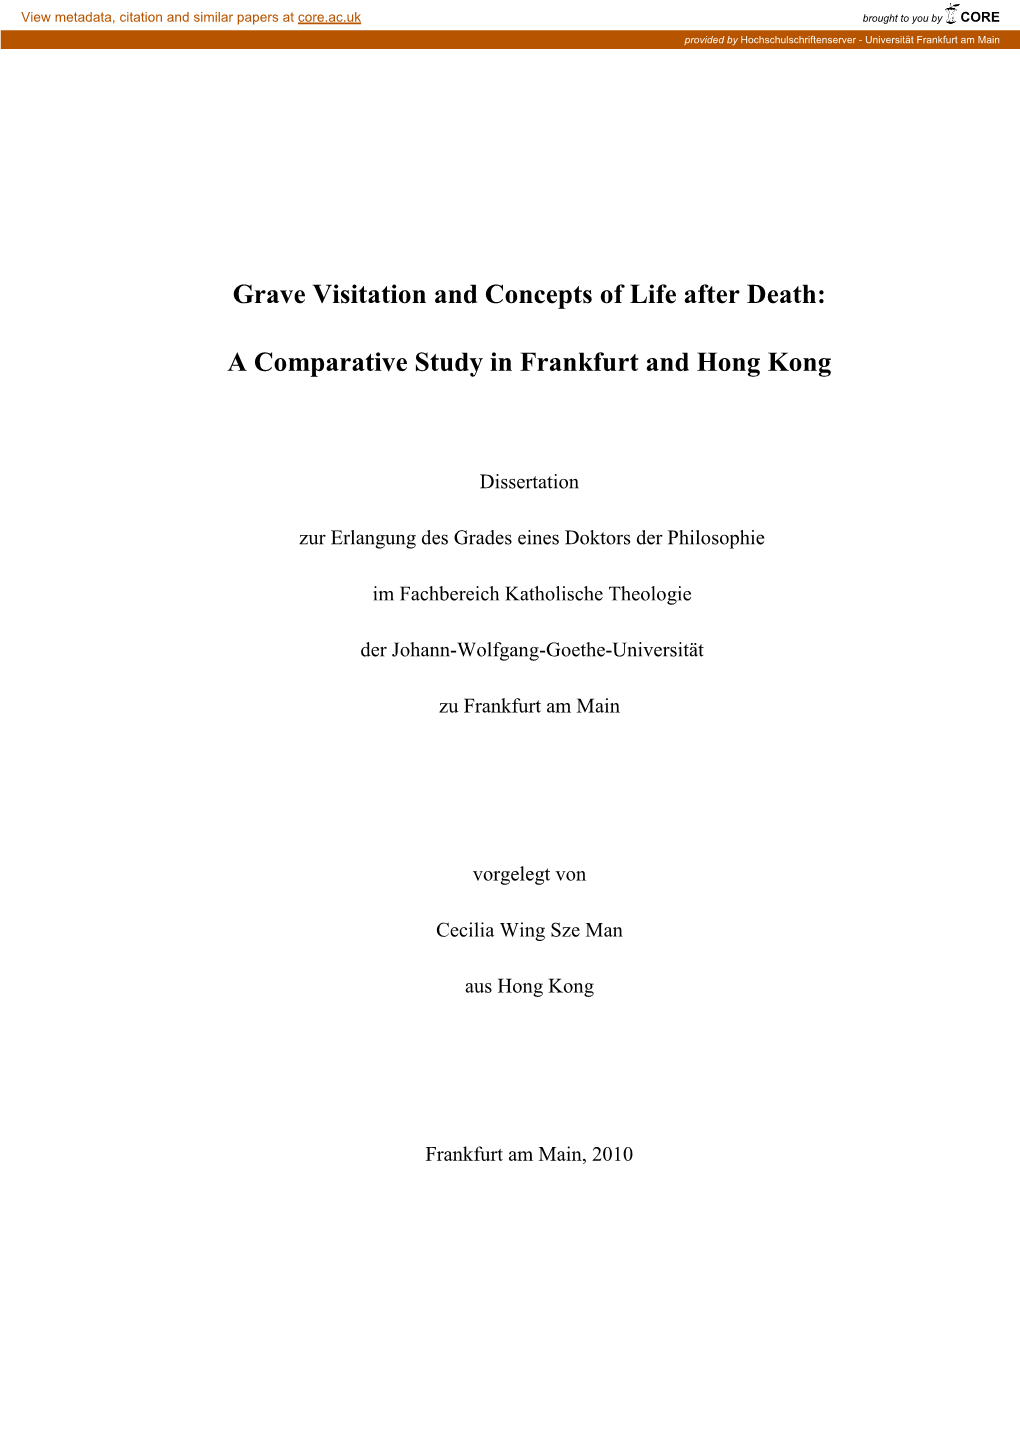 Grave Visitation and Concepts of Life After Death